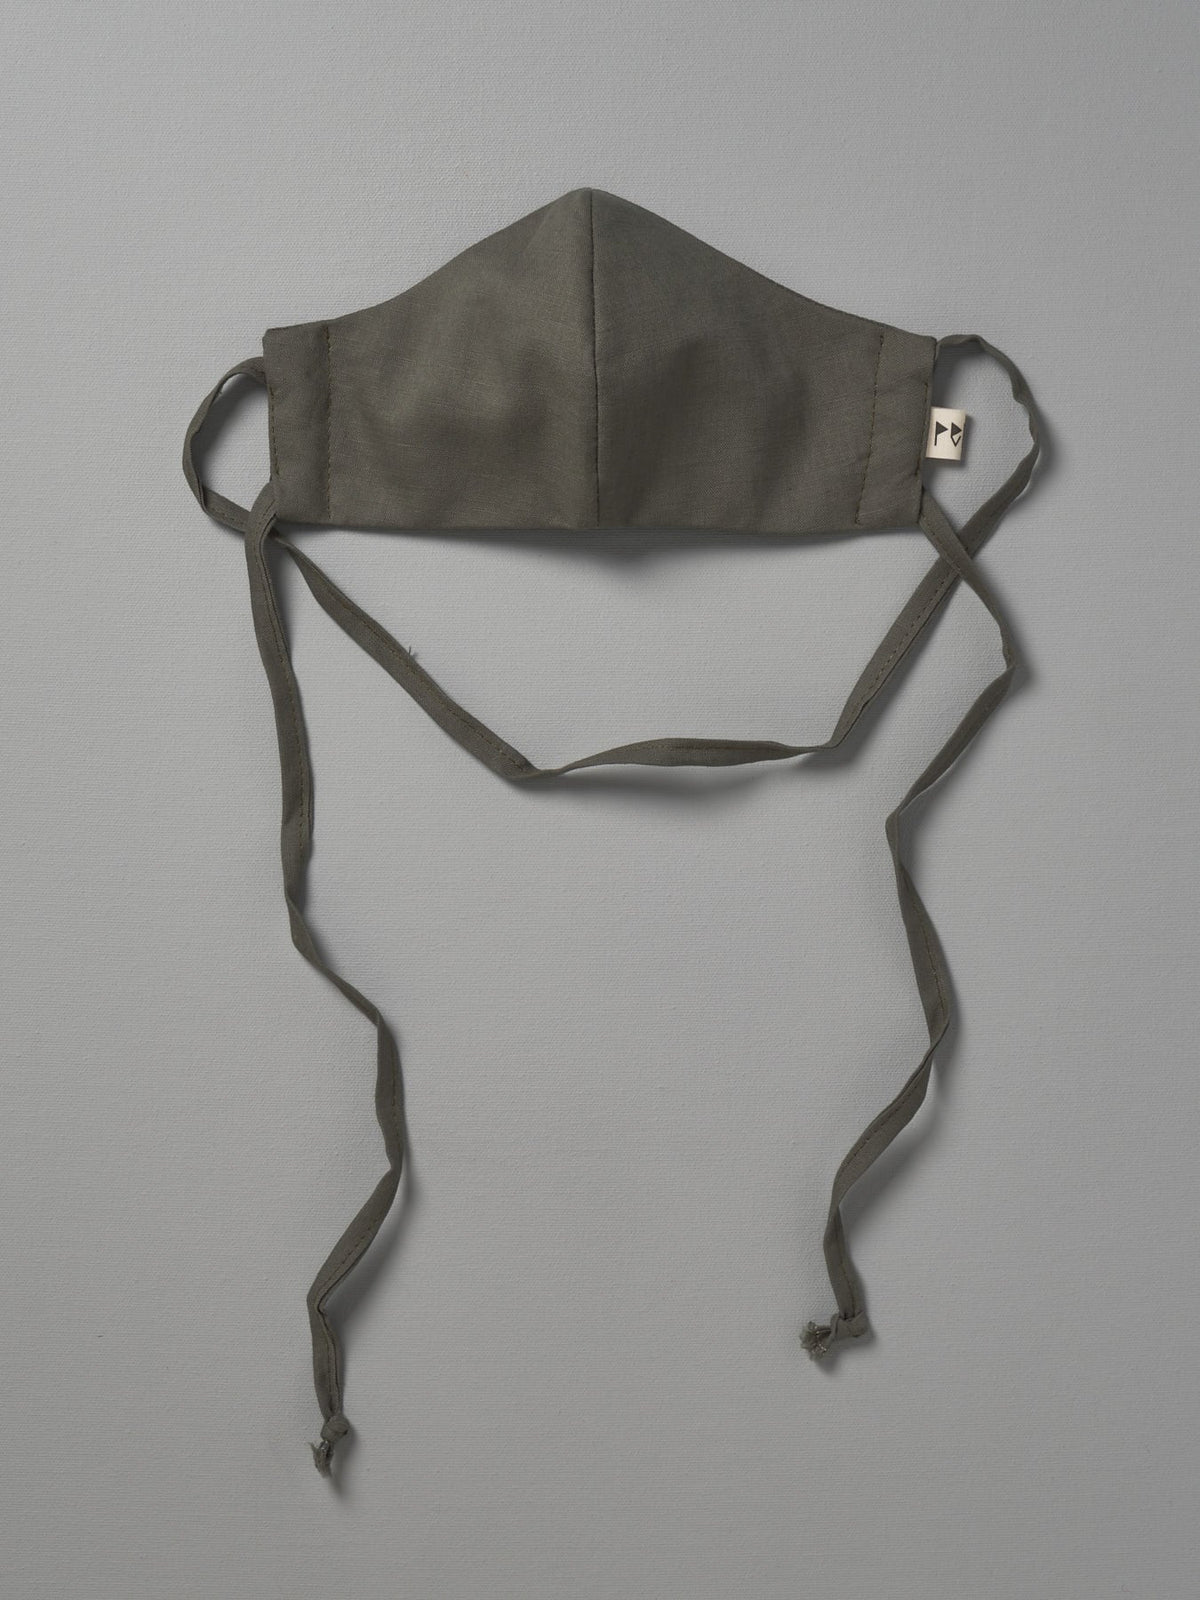 A Peppin Linen Face Mask - Moss hanging on a gray background.